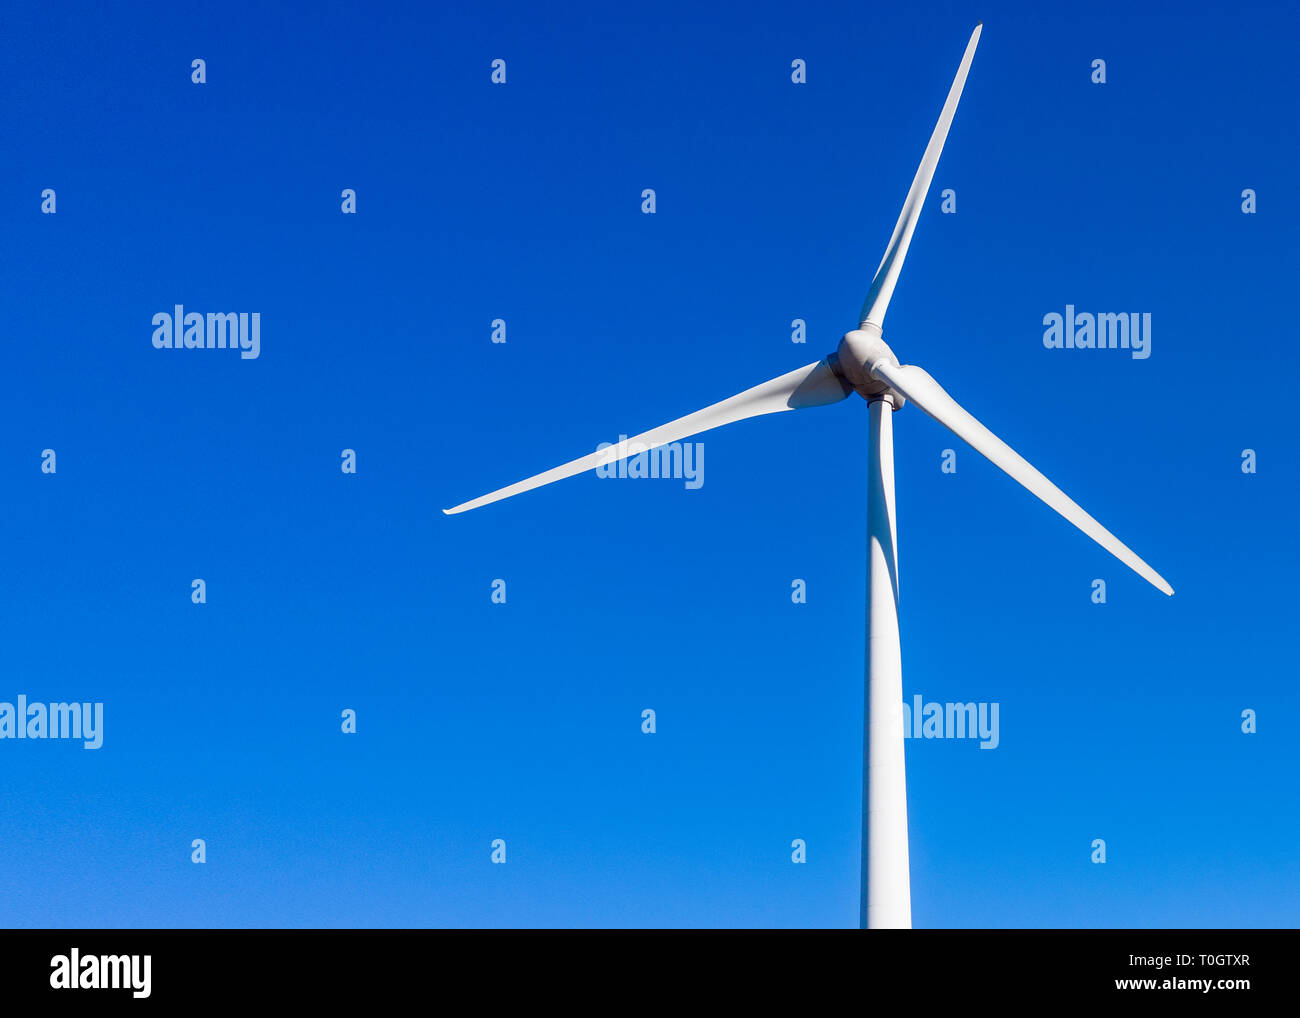 close up image of a single wind  turbine with a plain blue sky background  for copy space shot from above Stock Photo